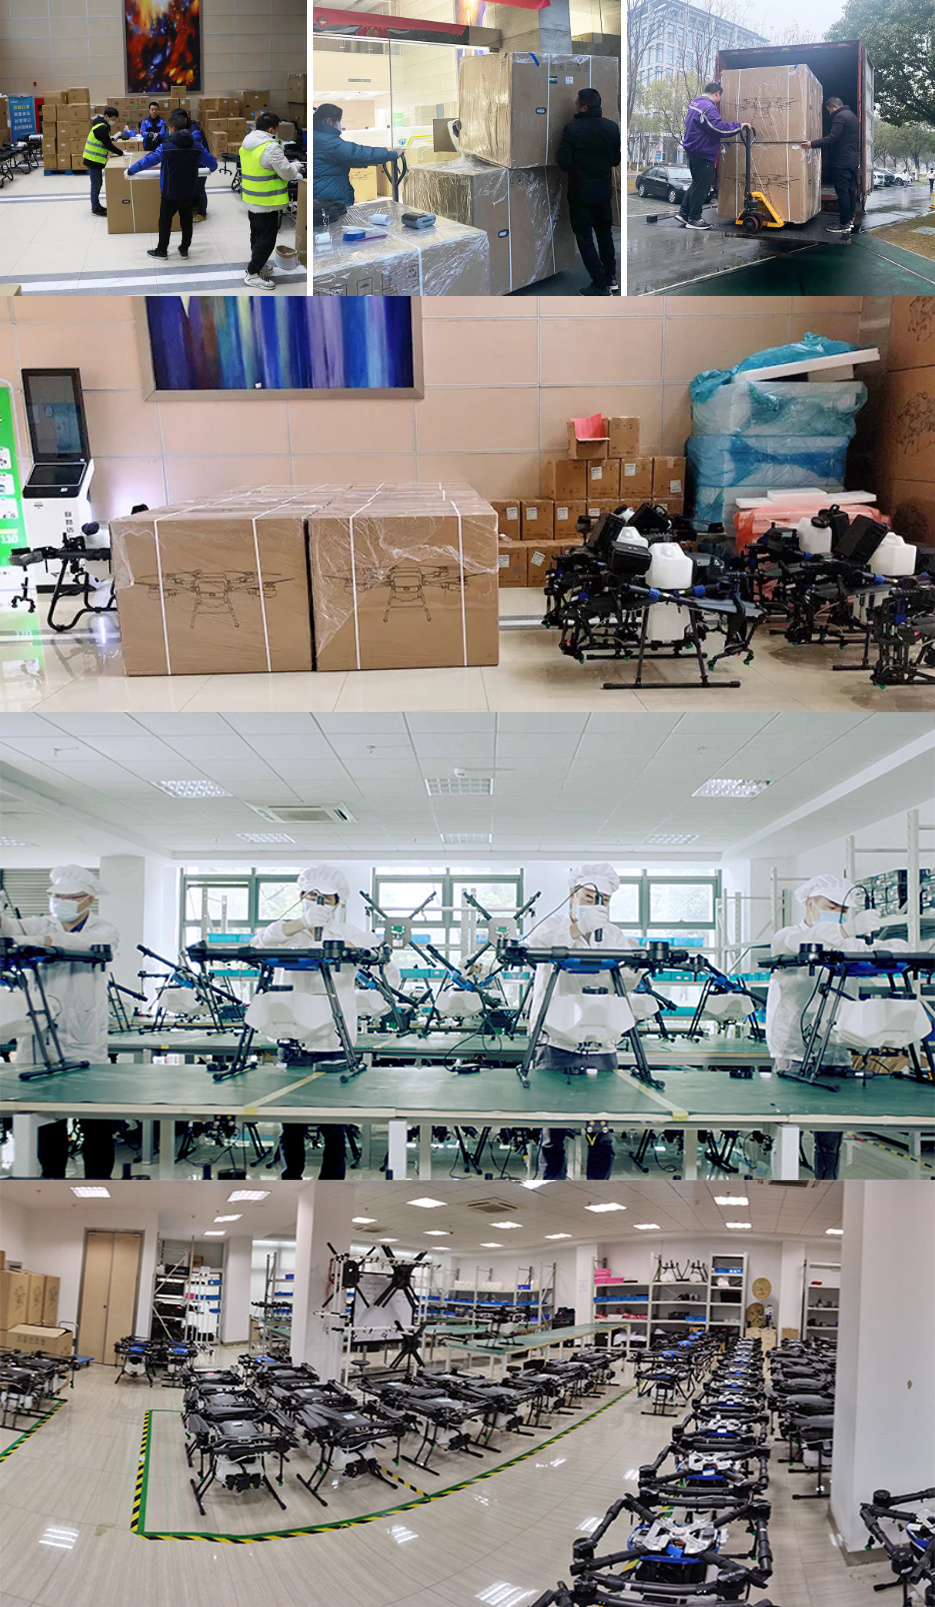 Large Volume Discount Easy to Assemble! 30L Large Capacity Agricultural Sprayer Drone Rack Uav Frame for Plant Protection Crop Spraying